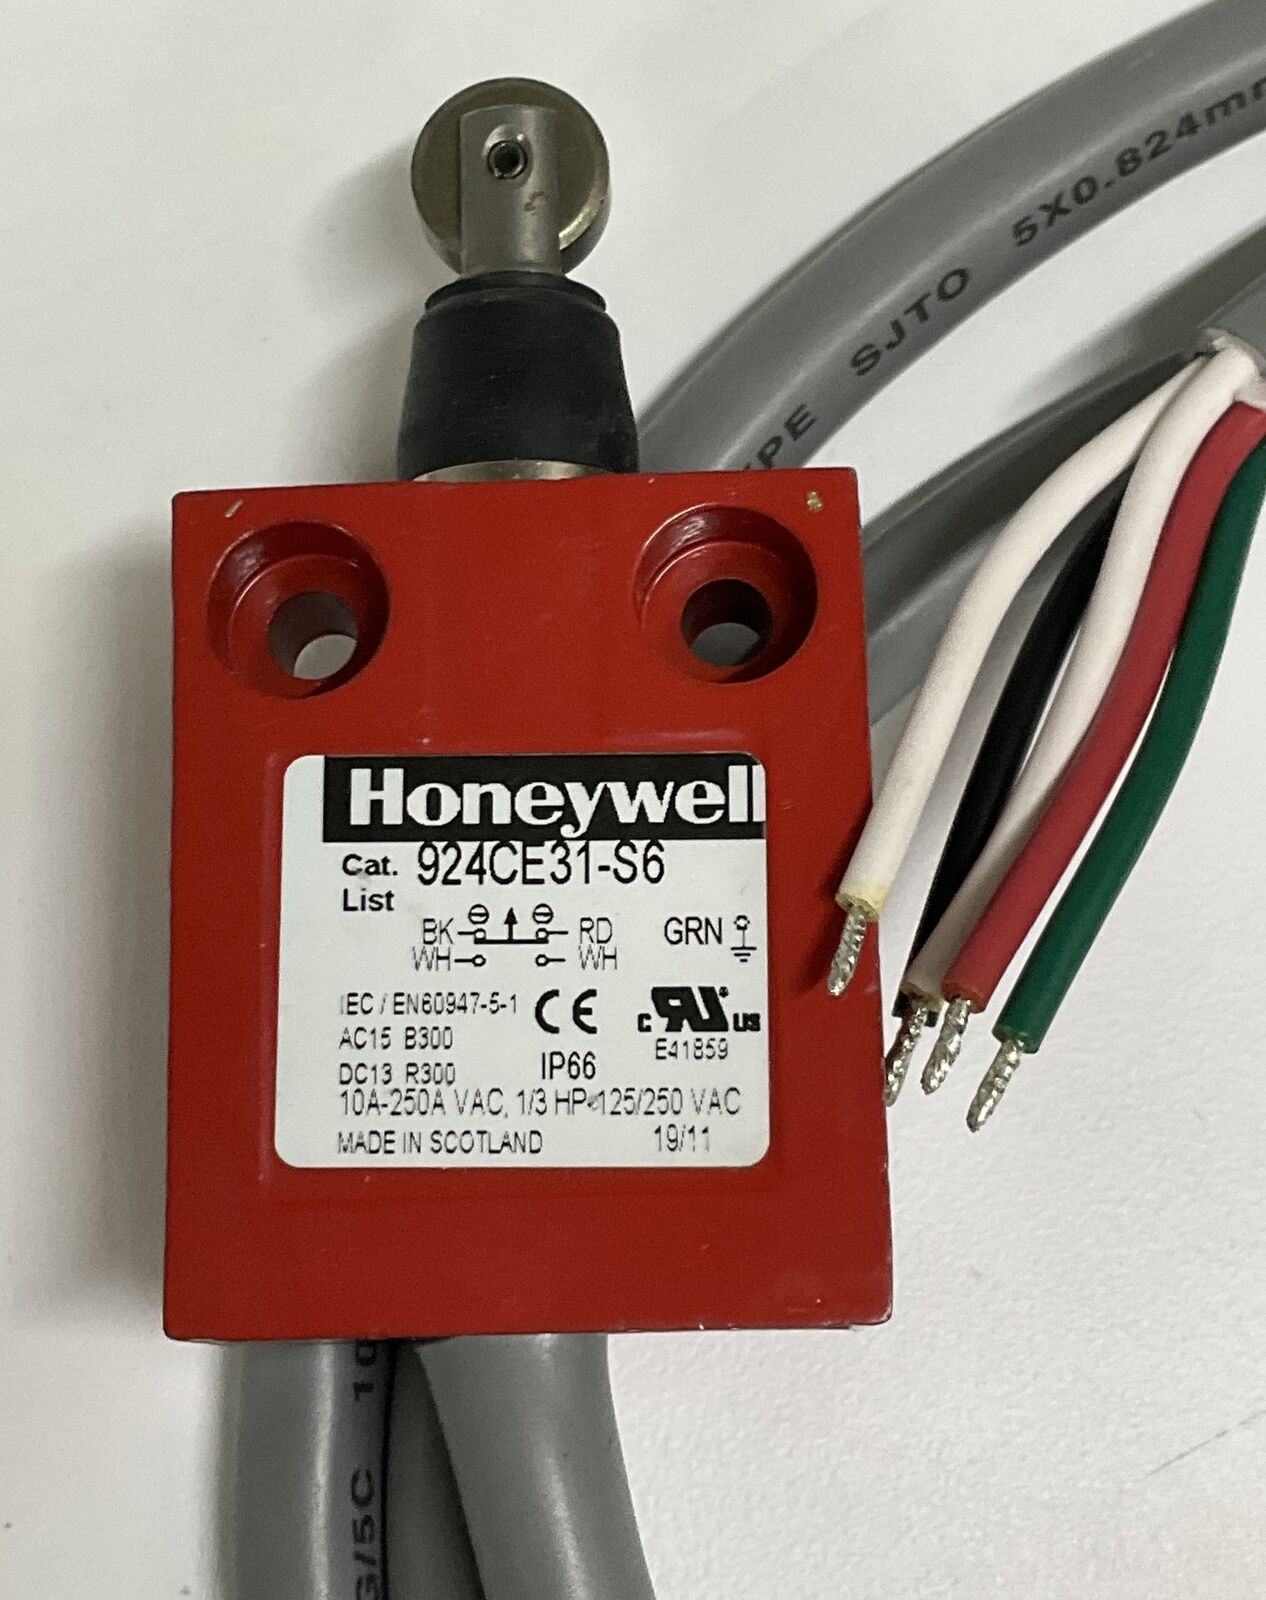 Honeywell 924CE31-S6 New SPDT 10A 250V Roller Snap Action Limit Switch (CBL107)